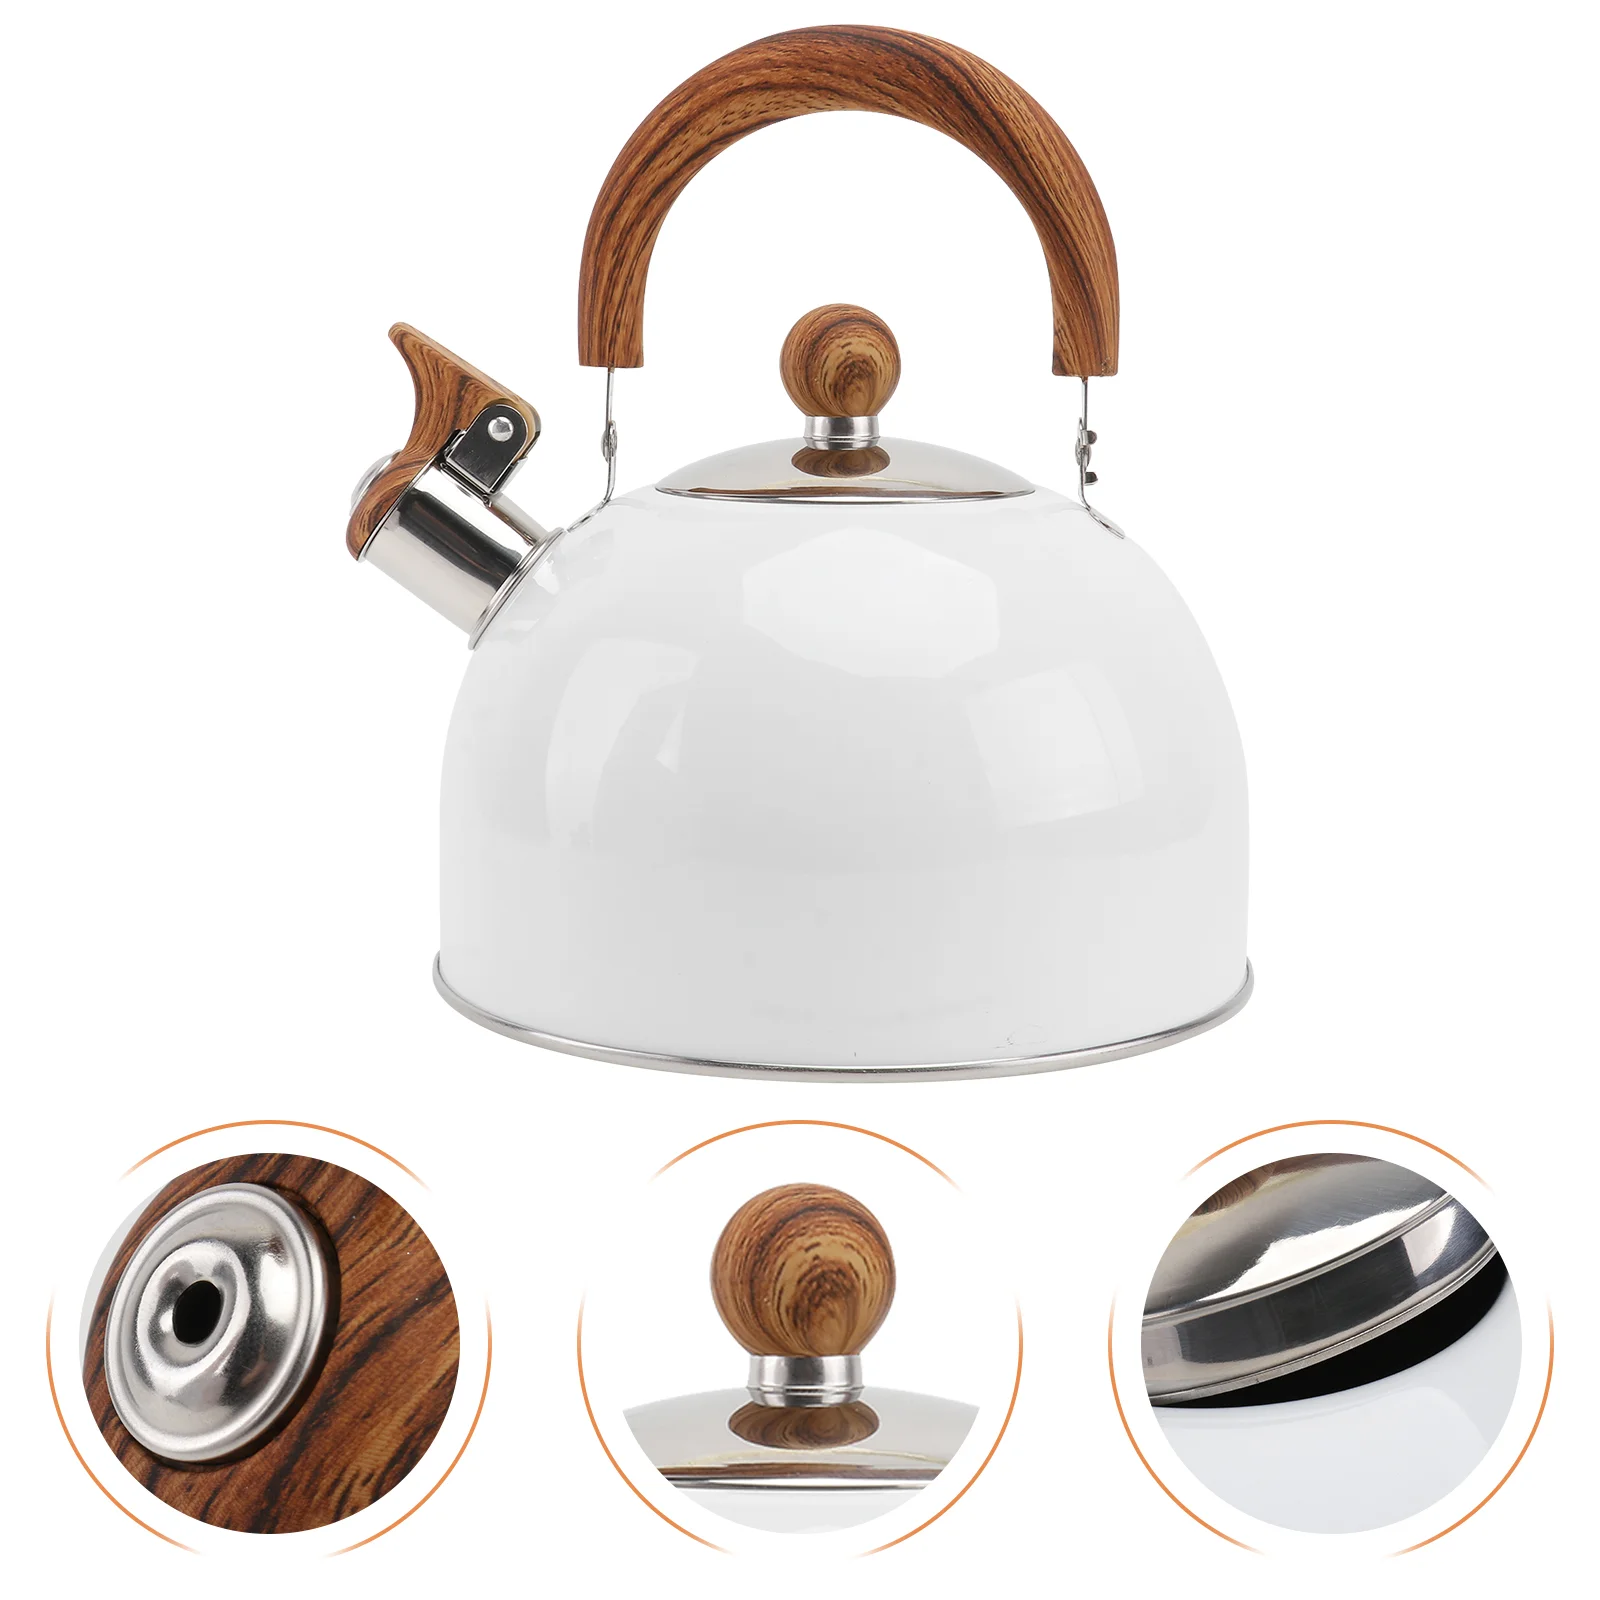 

Kettle Tea Whistling Water Teapot Pot Stove Stovetop Steel Stainless Boiling Gas Kettles Whistle Coffee Teakettle Camping Metal